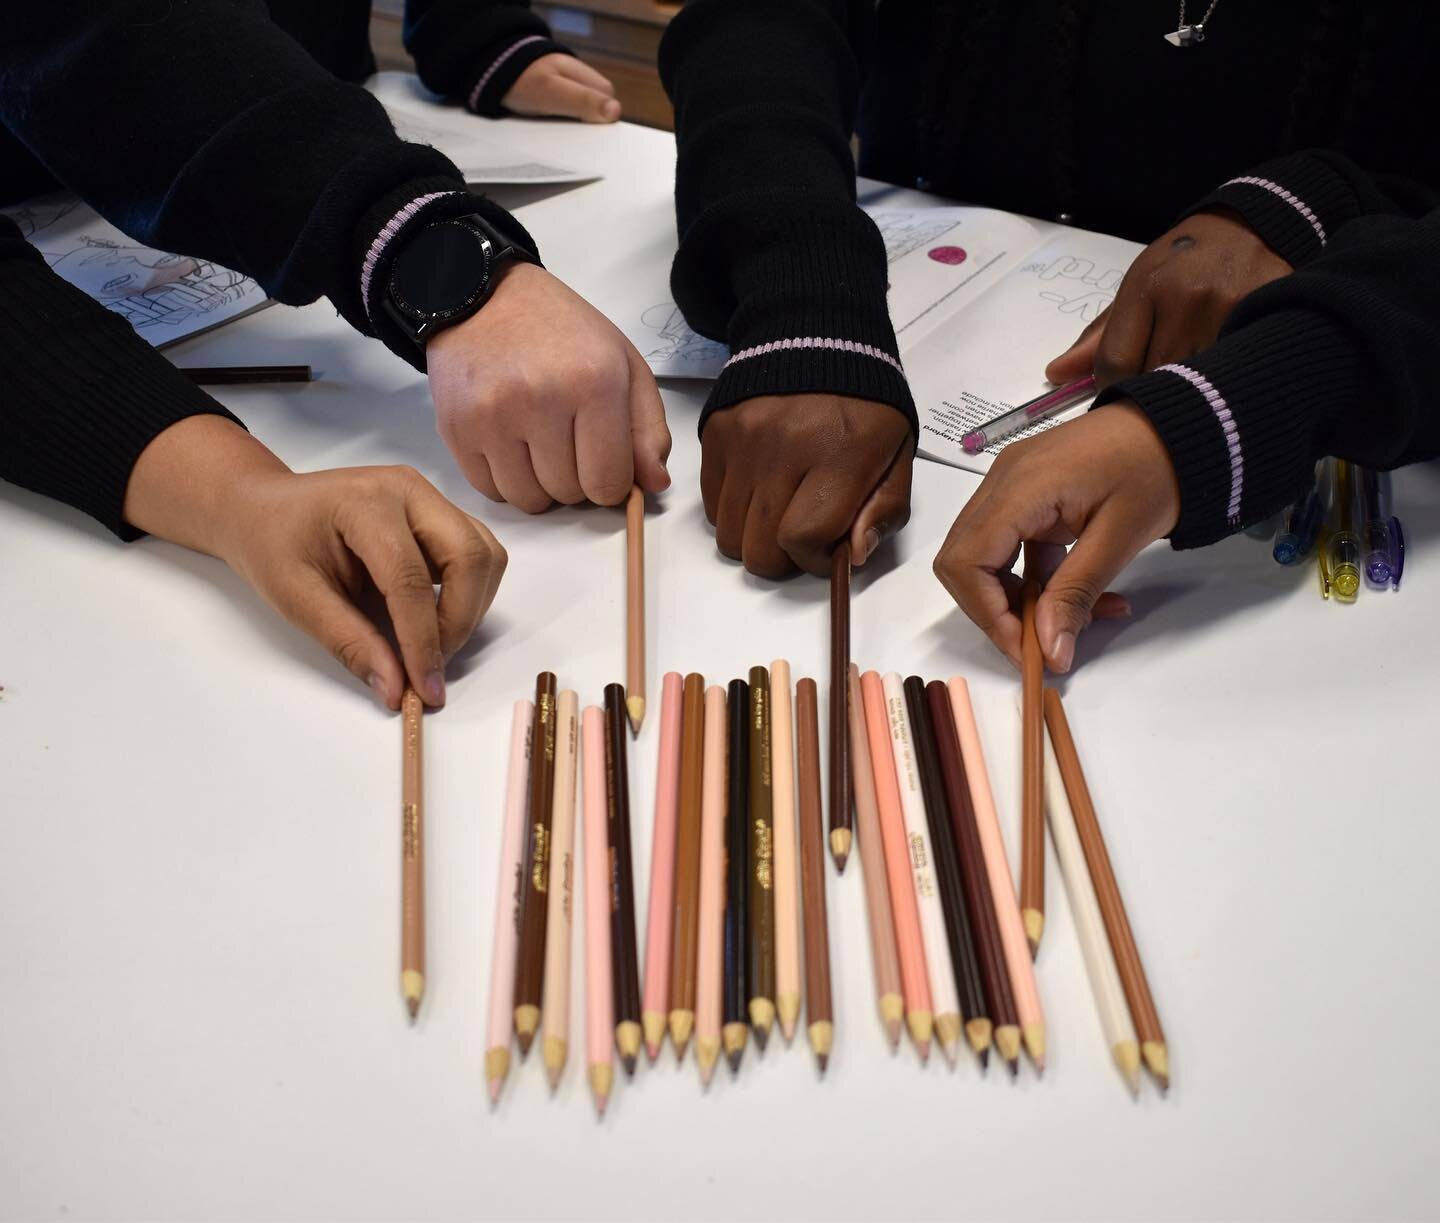 Sharing some additional highlights from Friday's Minority Fashion visit, where we welcomed a variety of guests, including @crayola_uk , who hosted a very therapeutic workshop for our students using colouring books designed by the team over at FMA. Cr